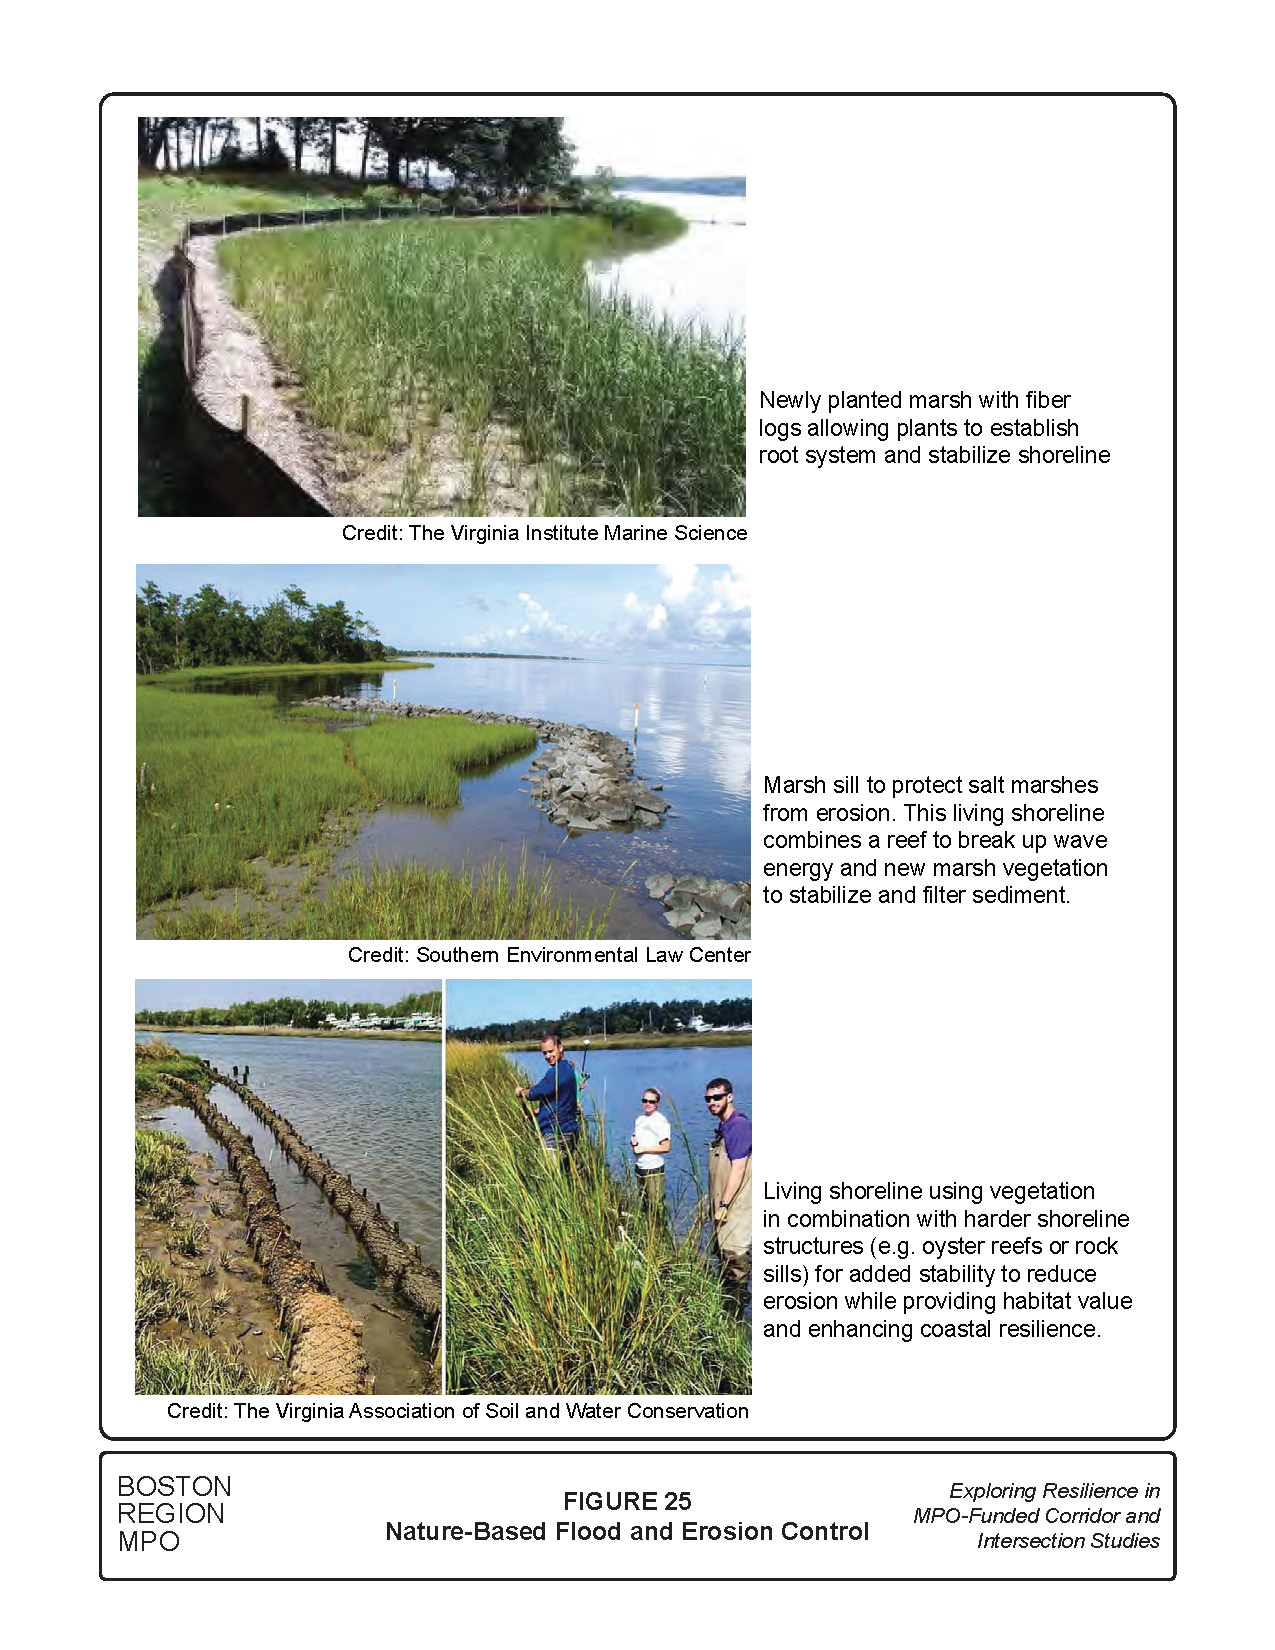 Figure 25 shows pictures of nature-based solutions for flood and erosion control. 